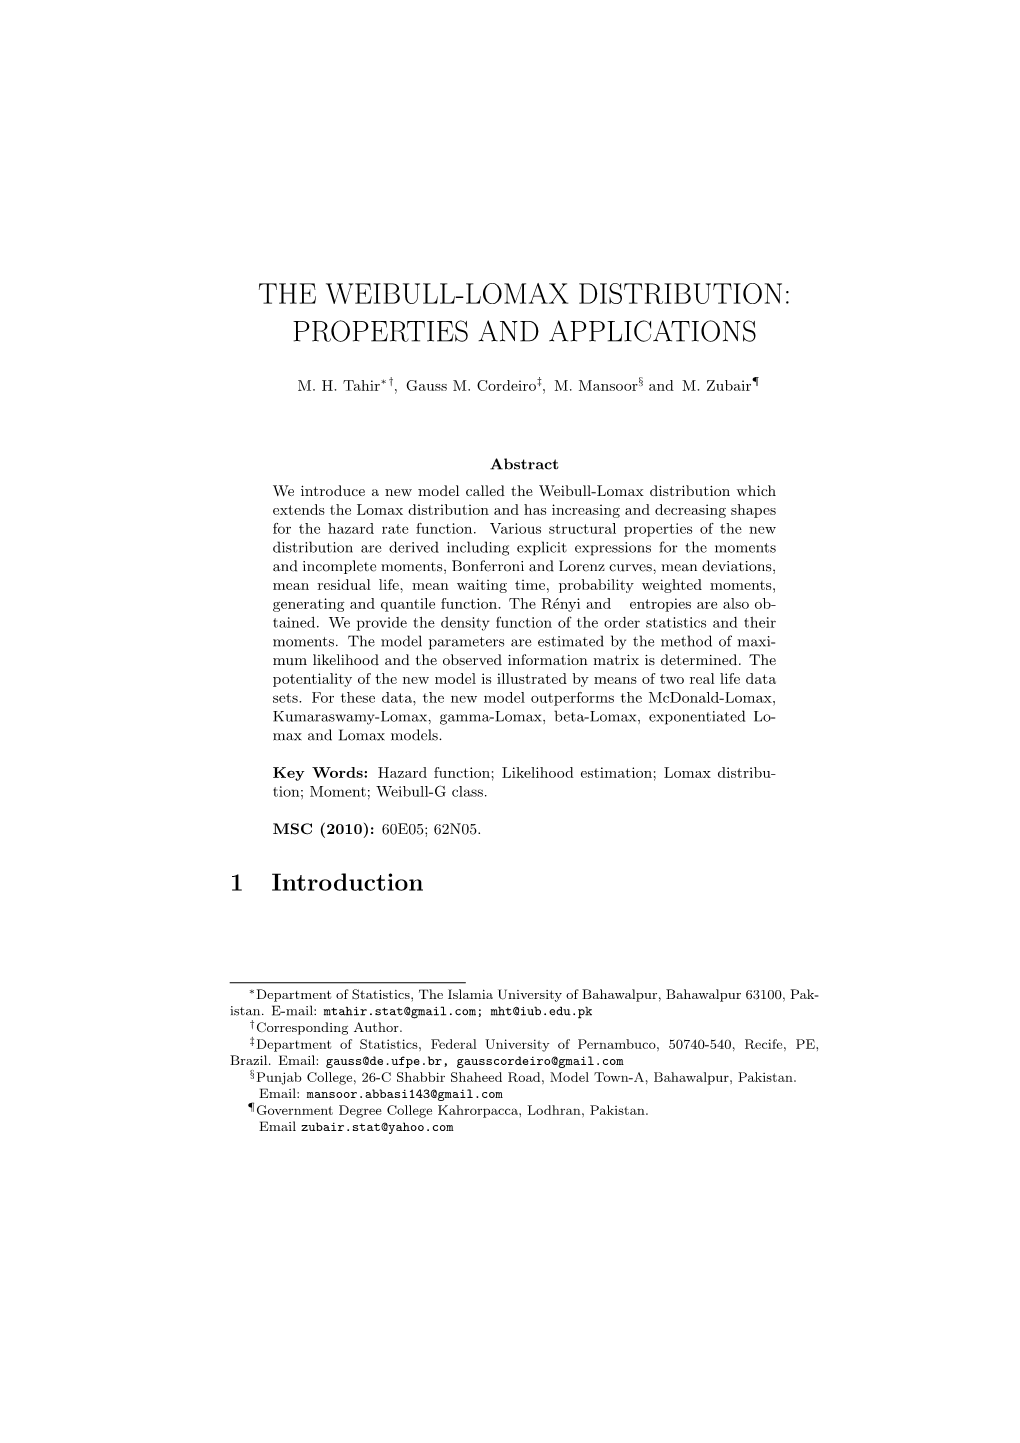 The Weibull-Lomax Distribution: Properties and Applications